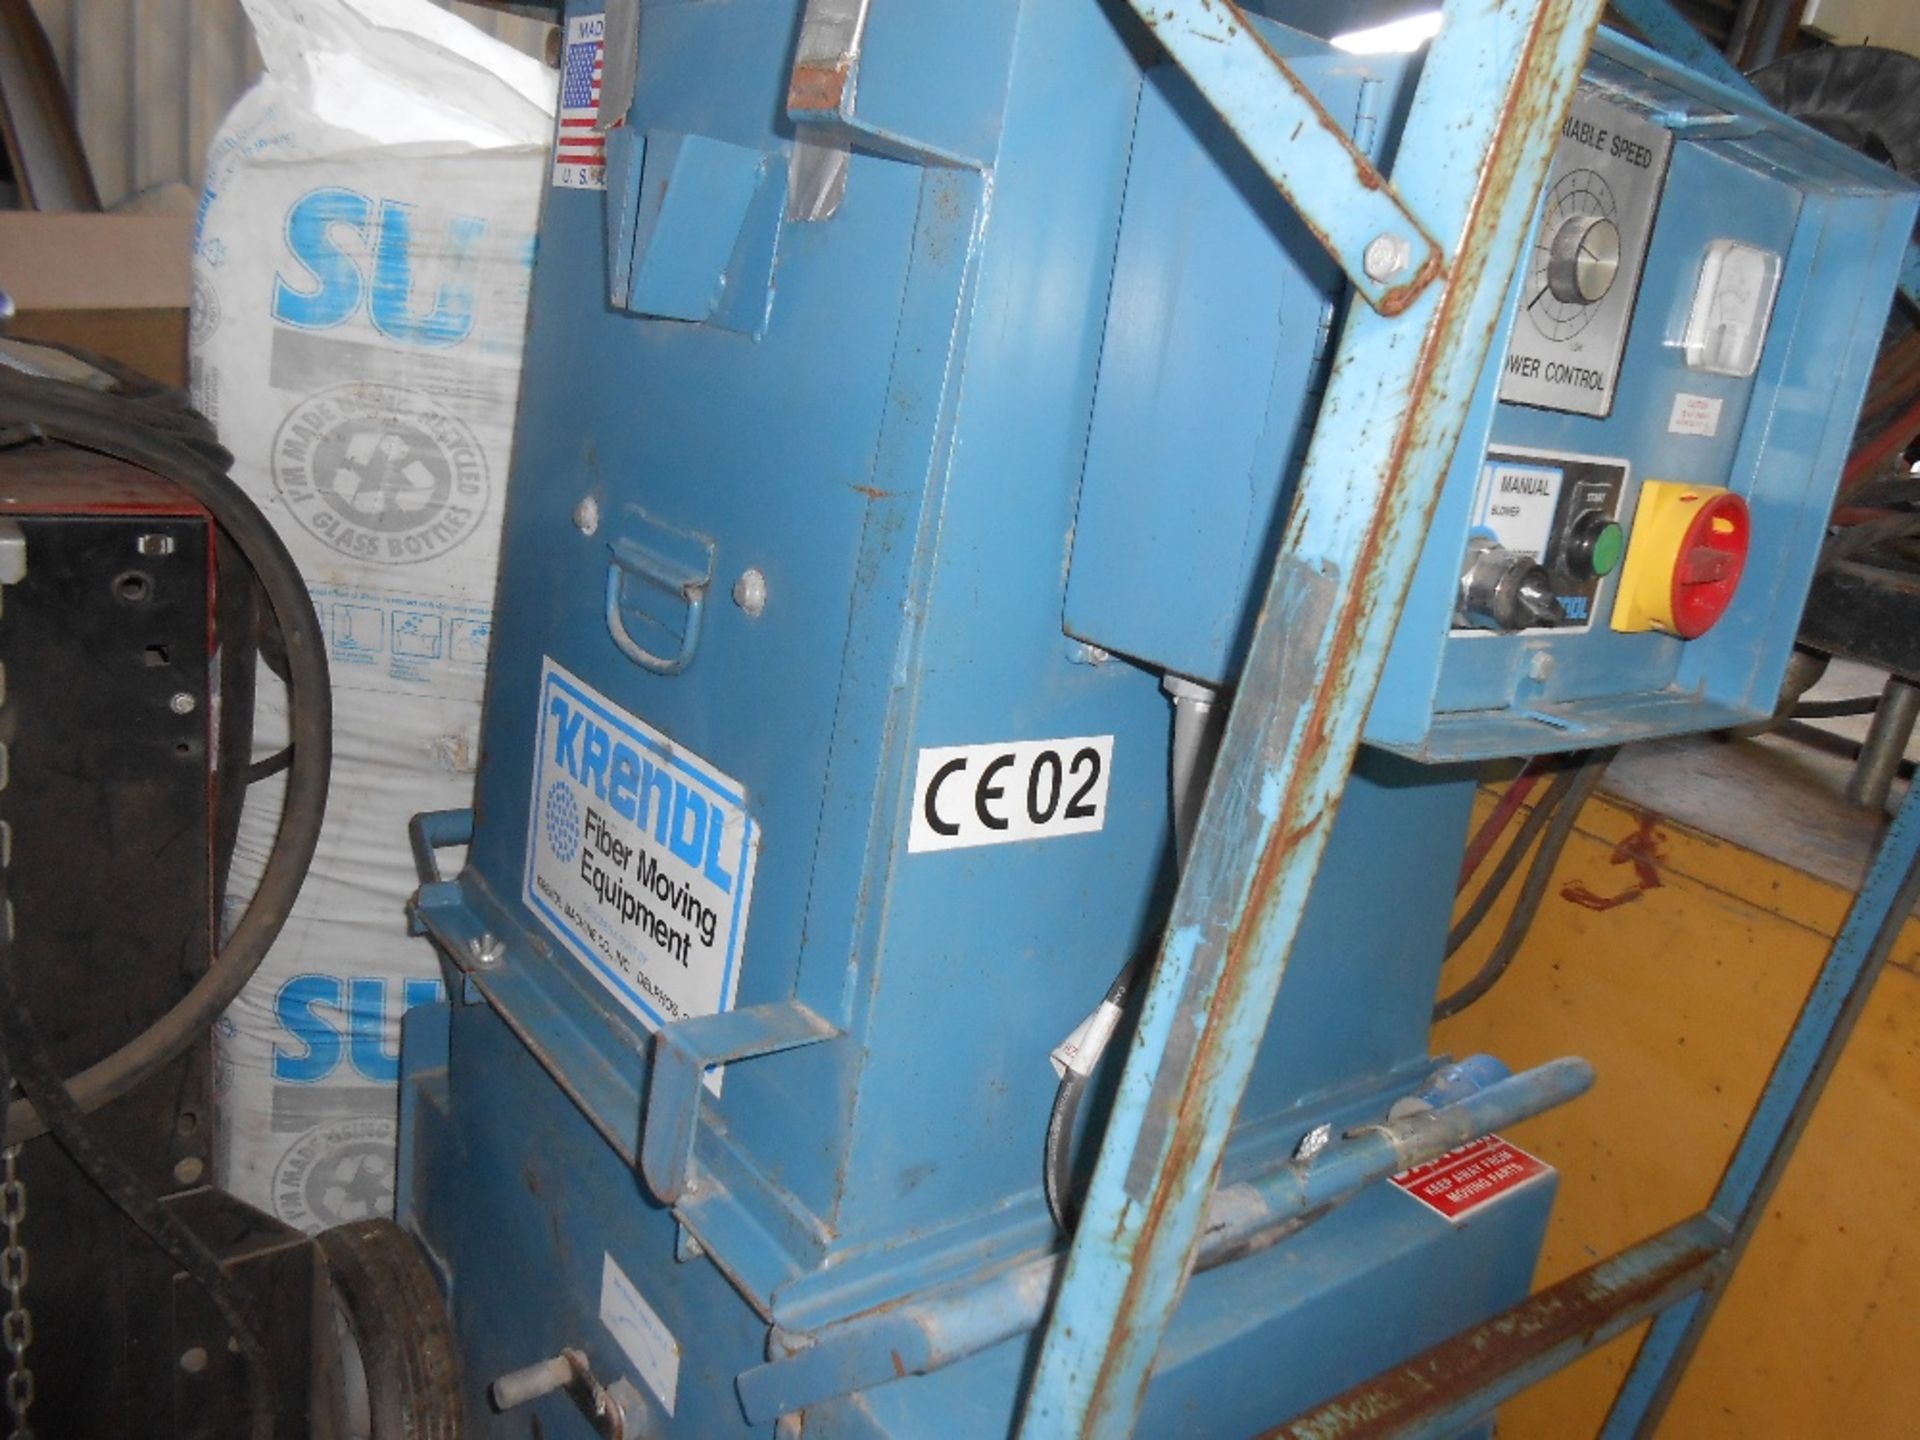 Krenol fibre insulation shredder and blower unit sourced from company liquidation. - Image 5 of 5